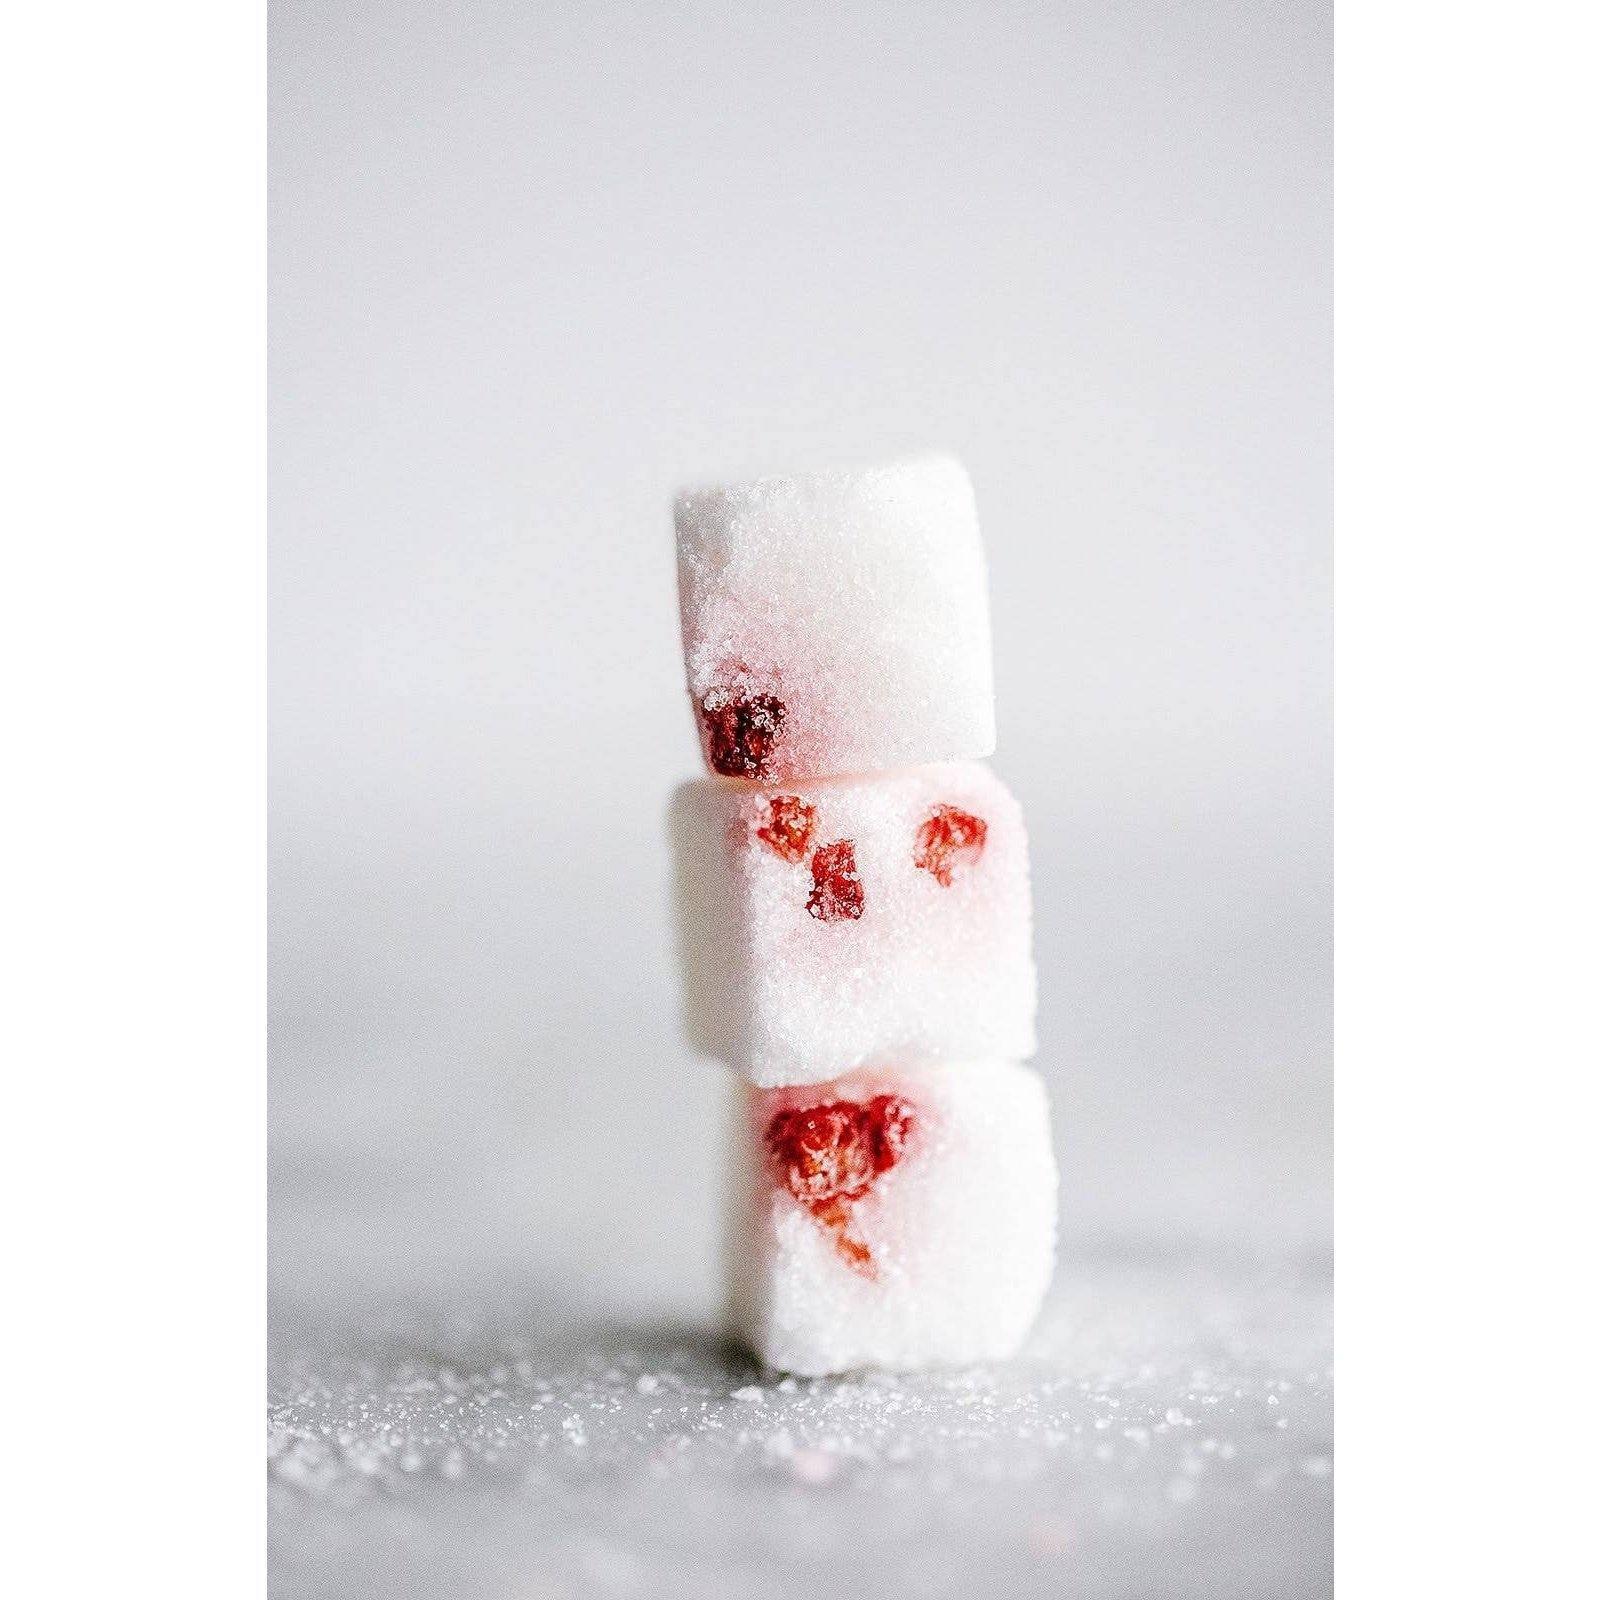 LUXE Sugar Champagne Cube | Raspberry - Sorelle Gifts